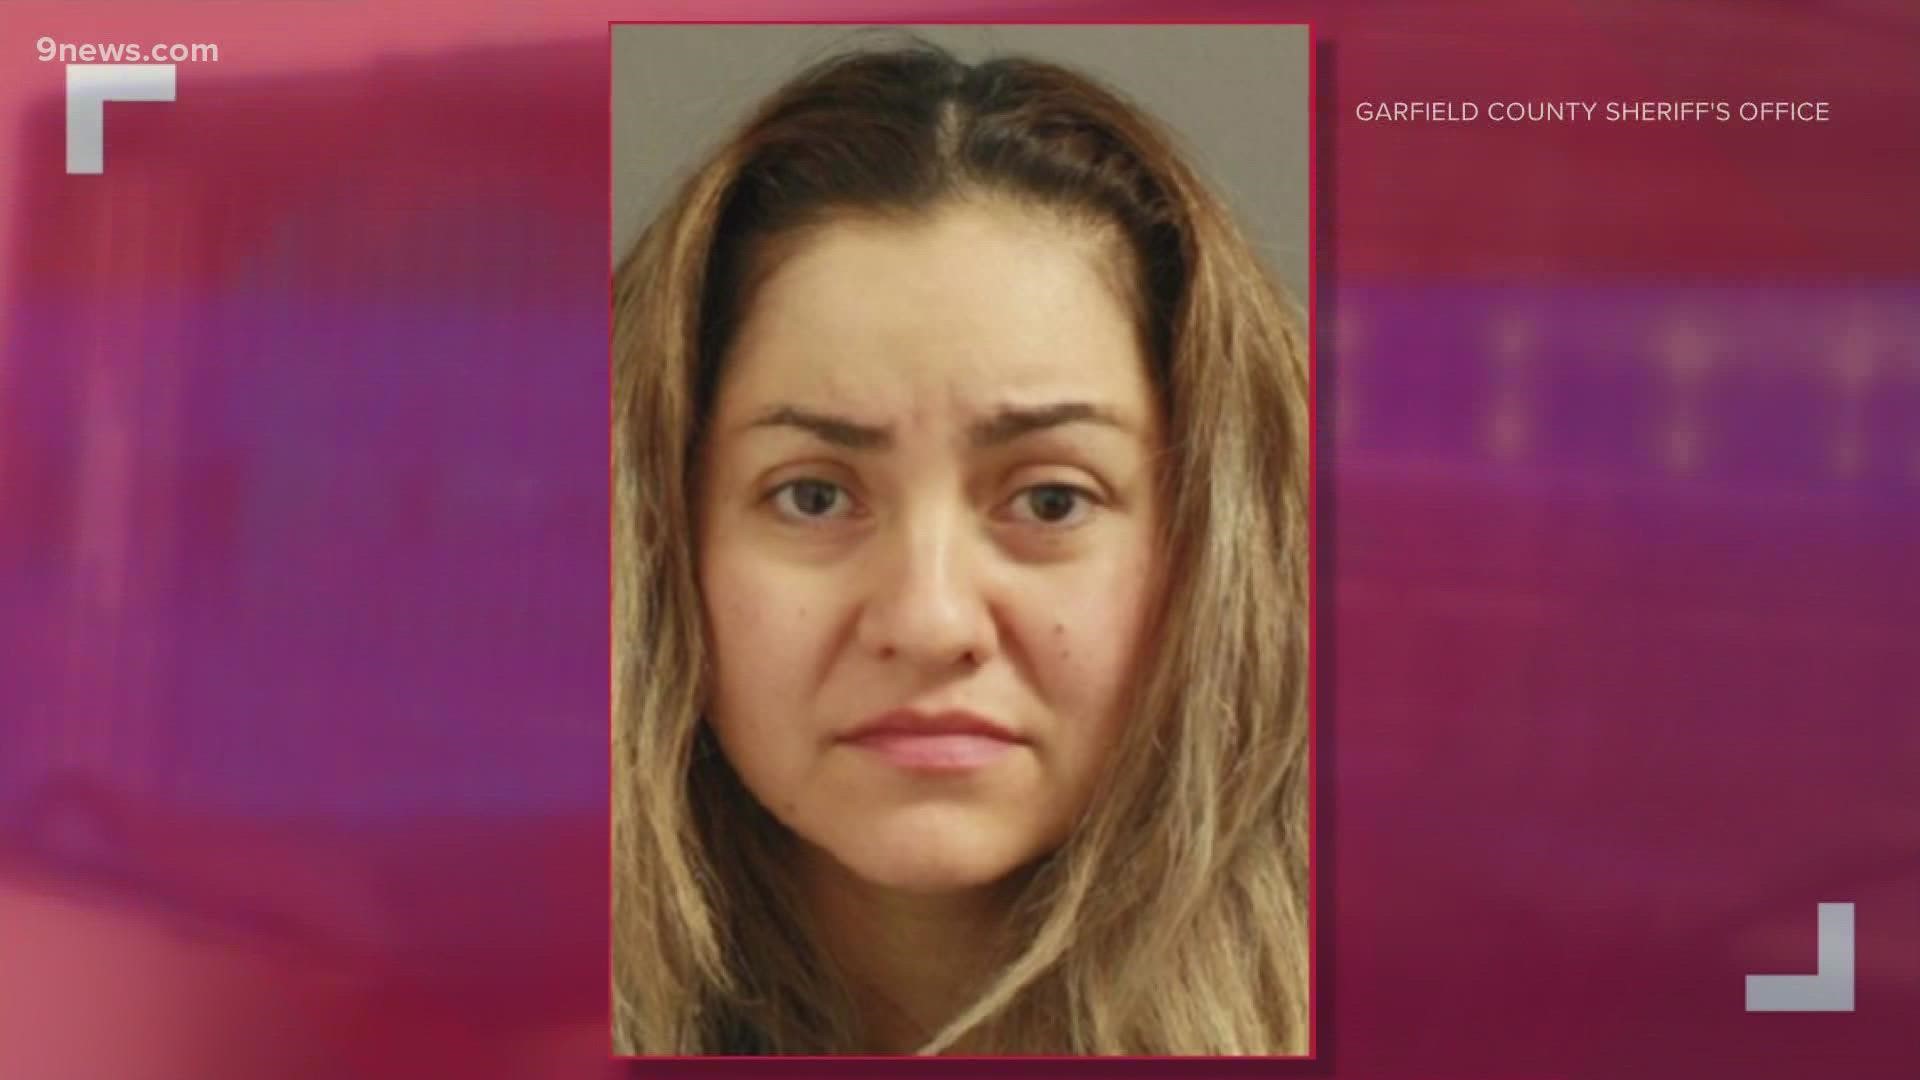 Claudia Camacho-Duenas, 37, was arrested in connection to the deaths of her 18 and 11-year-old children, the Glenwood Springs Police Department said.